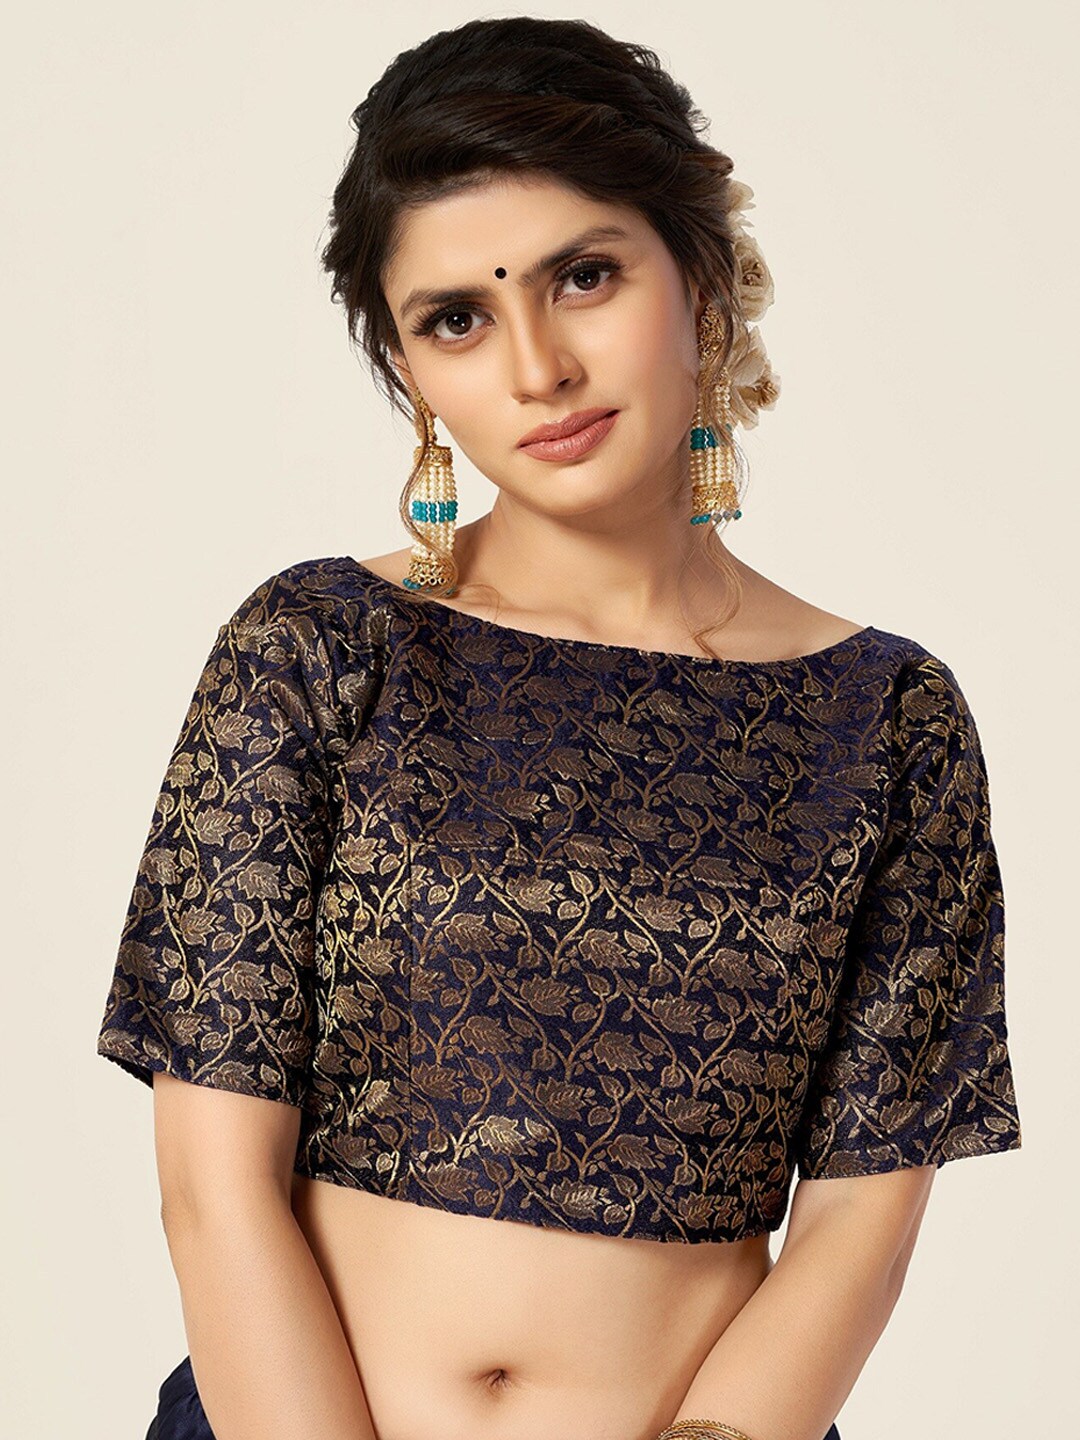 HIMRISE Women Navy Blue Woven Design Saree Blouse Price in India